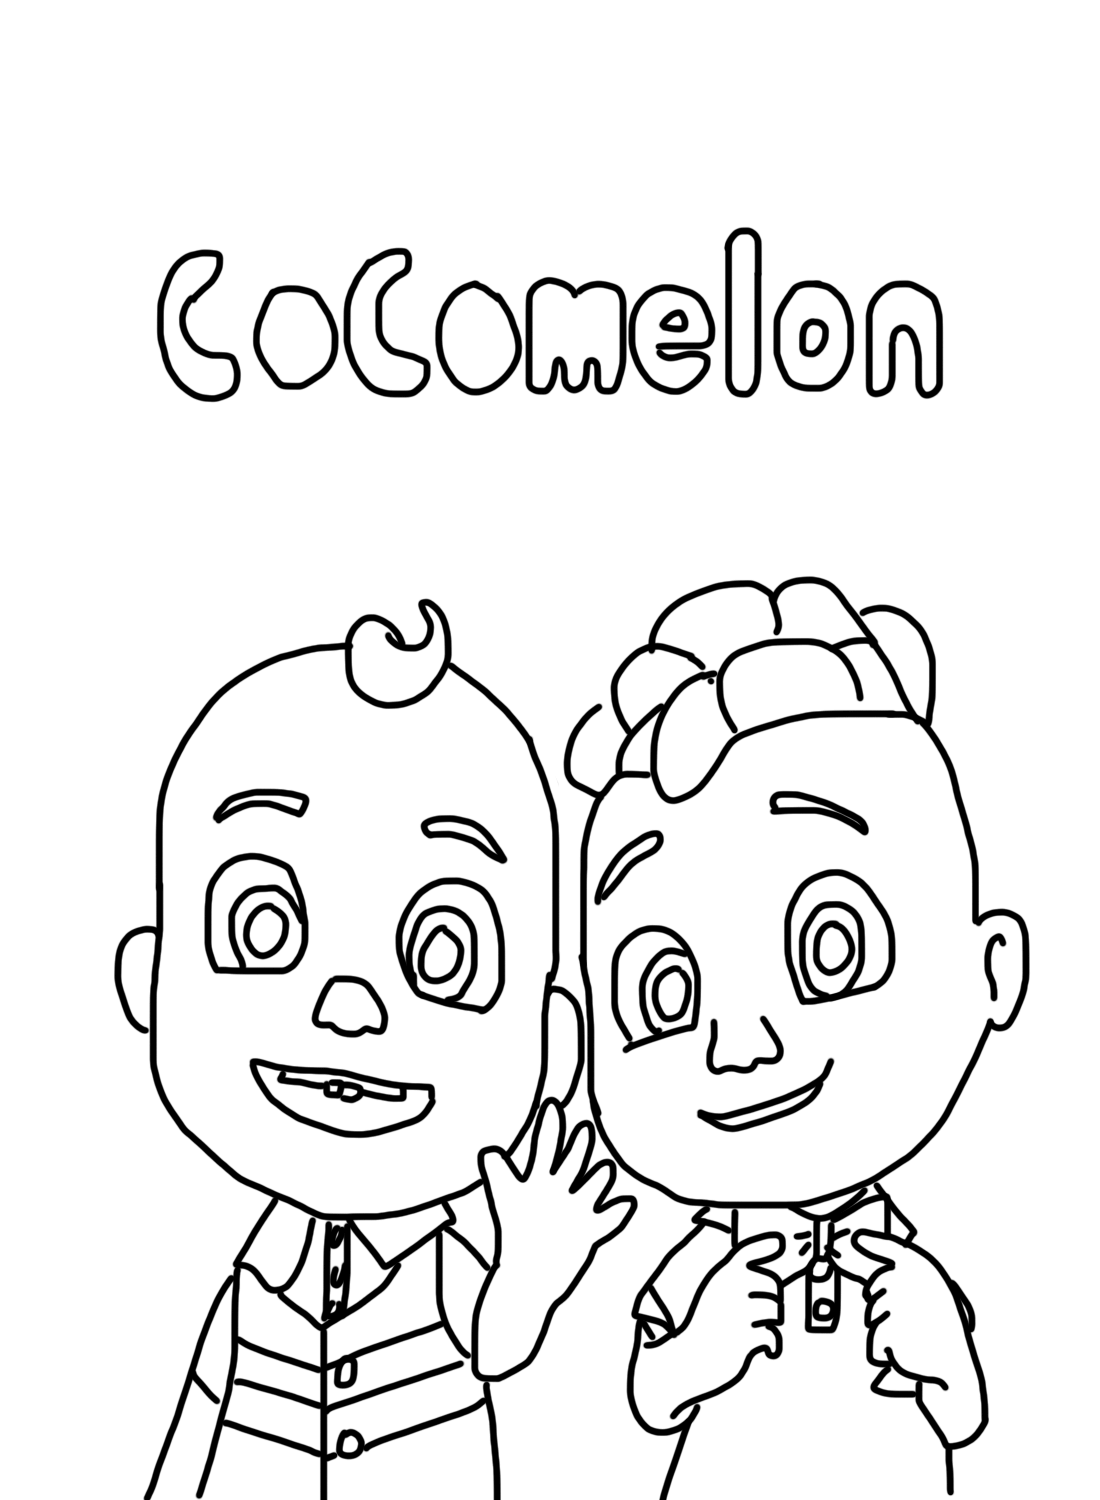 Free Cocomelon Coloring Pages